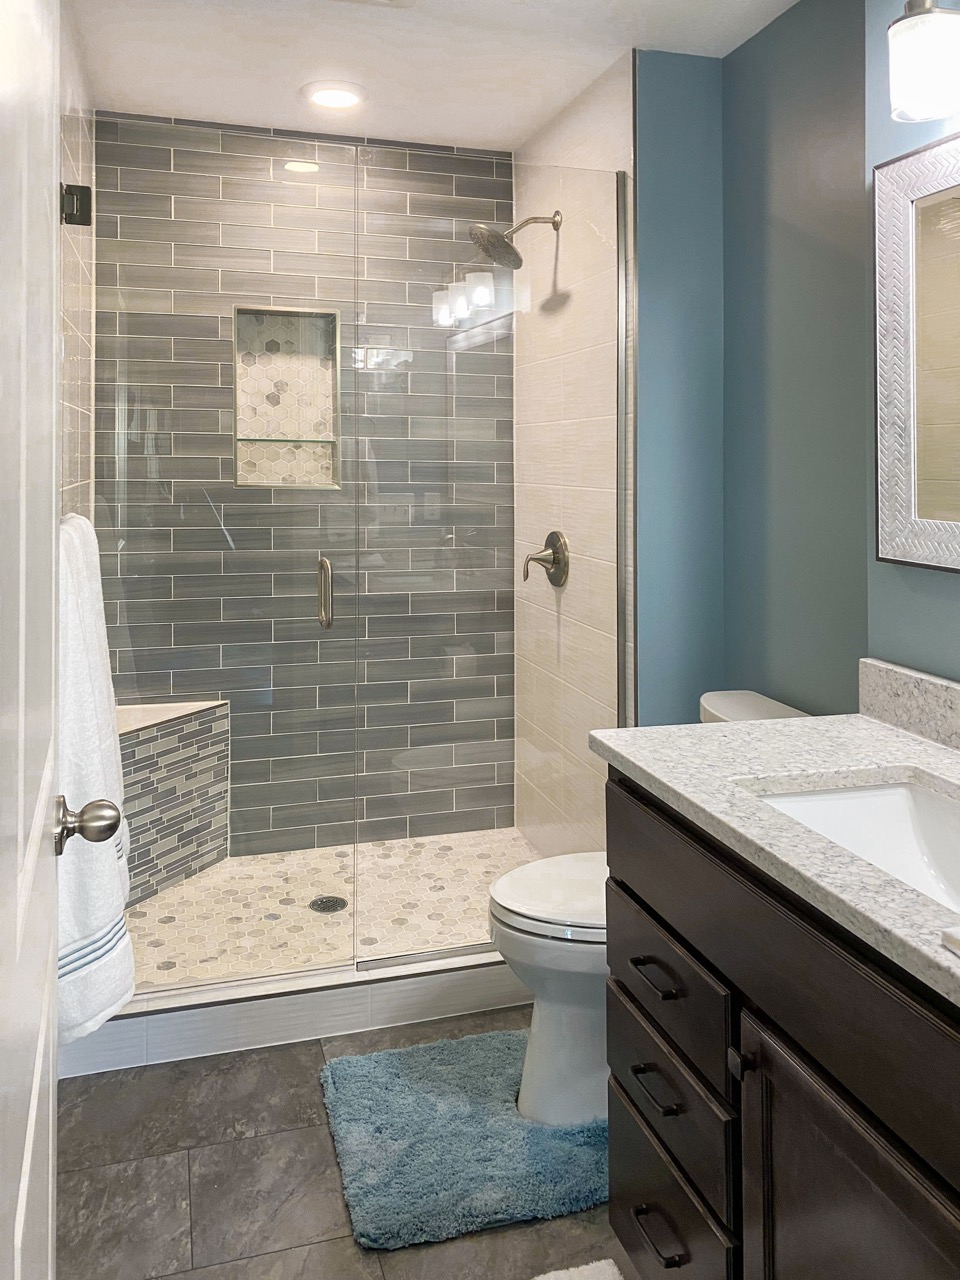 A modern bathroom with teal accents recently renovated by House Lift Inc. of the Twin Cities